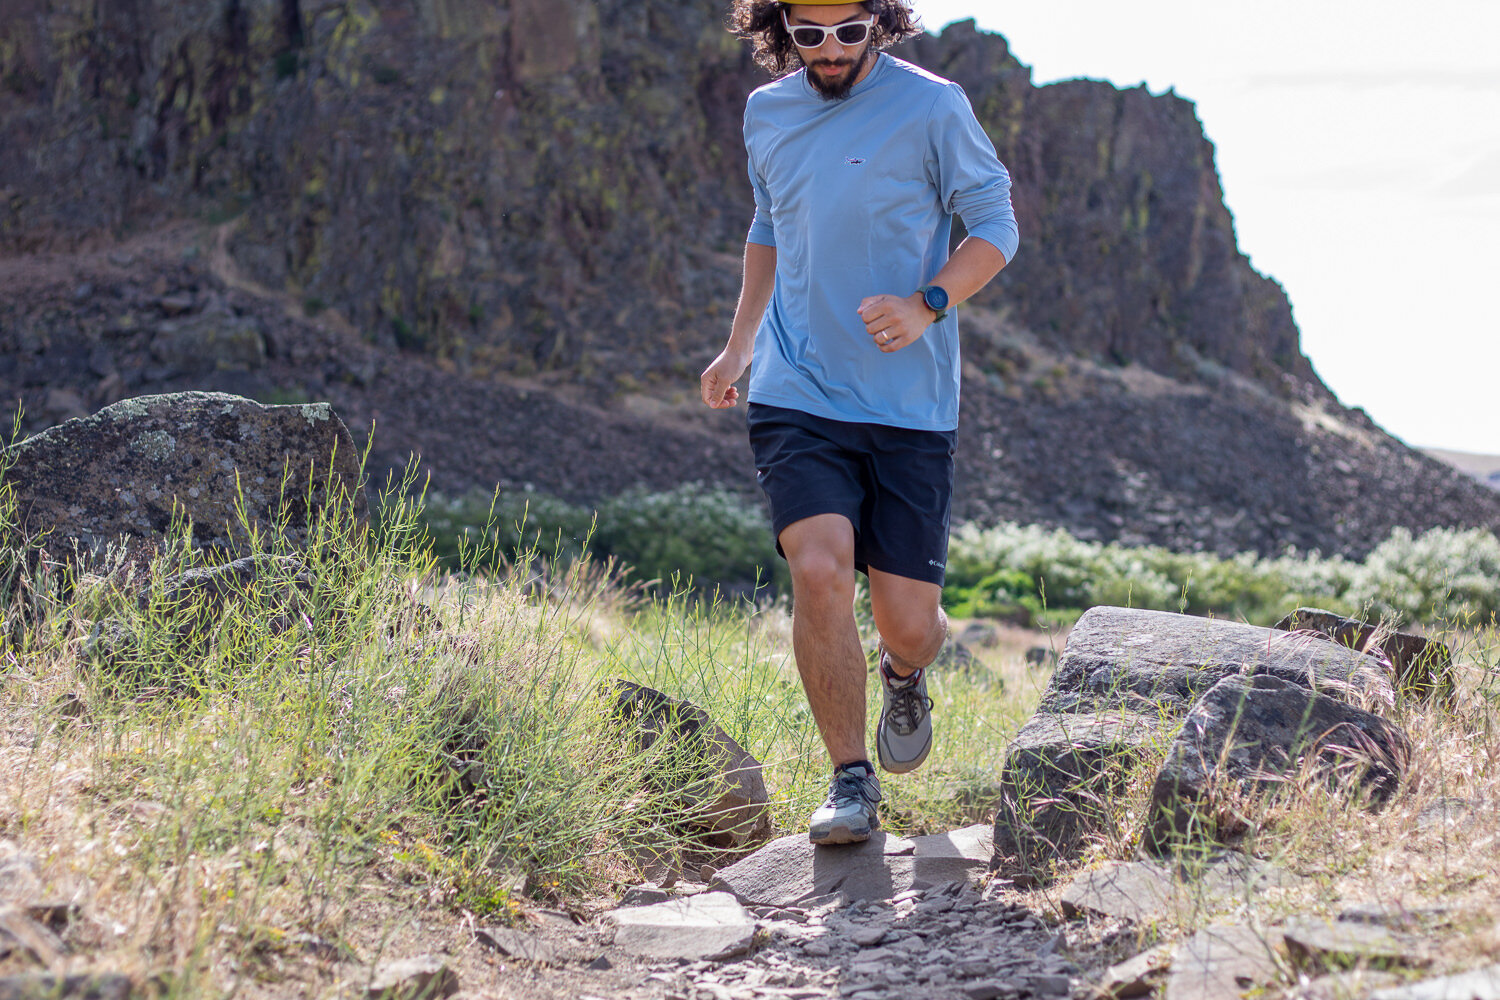 The Altra Lone Peak 5 have zero drop from heel to toe for less stress on your body